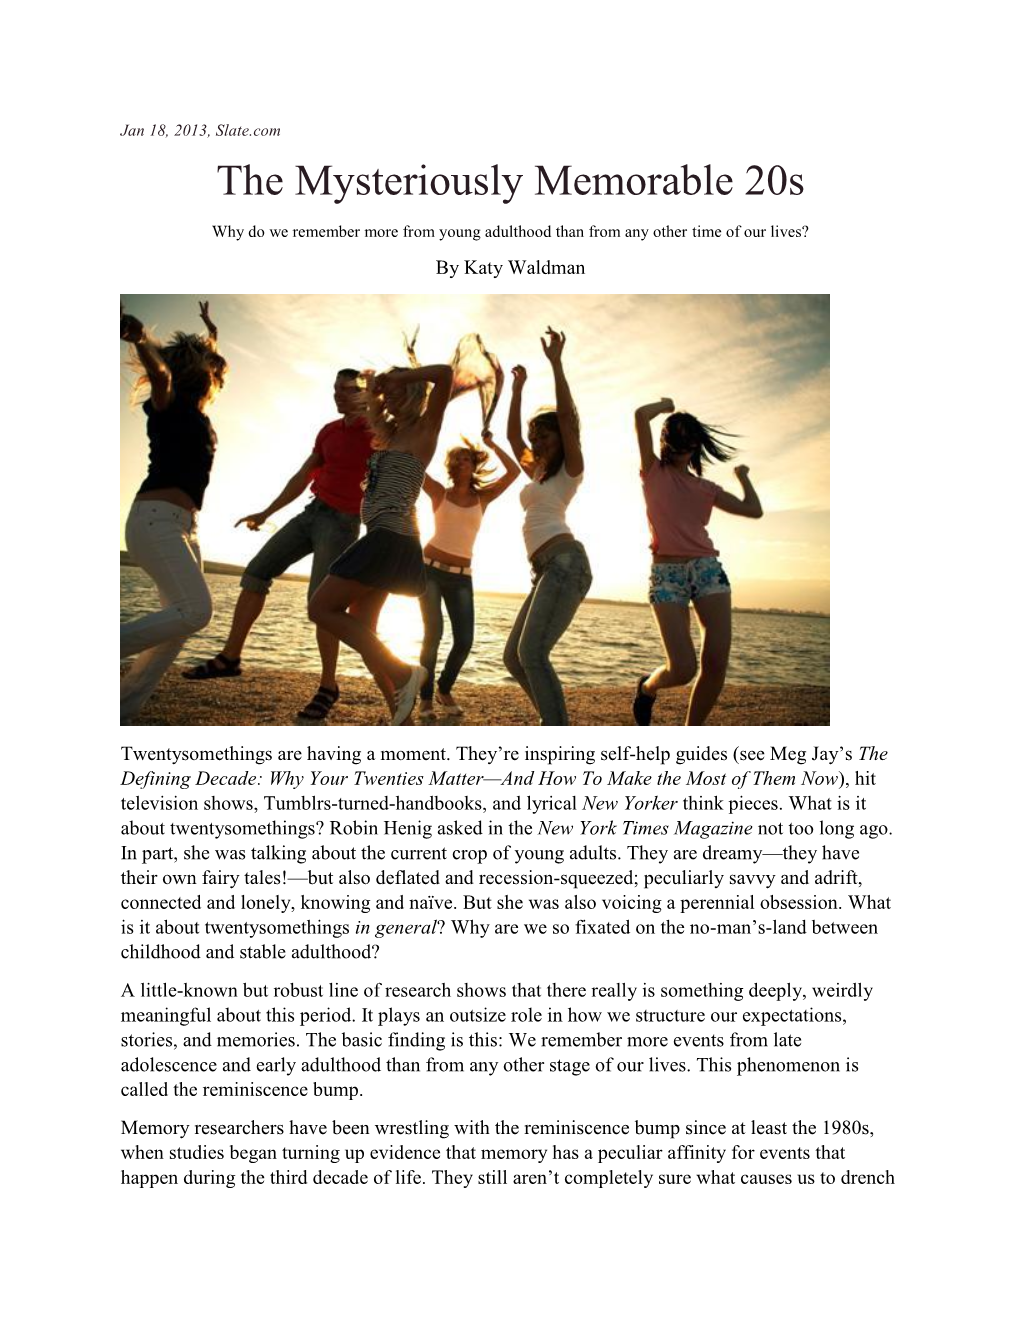 The Mysteriously Memorable 20S